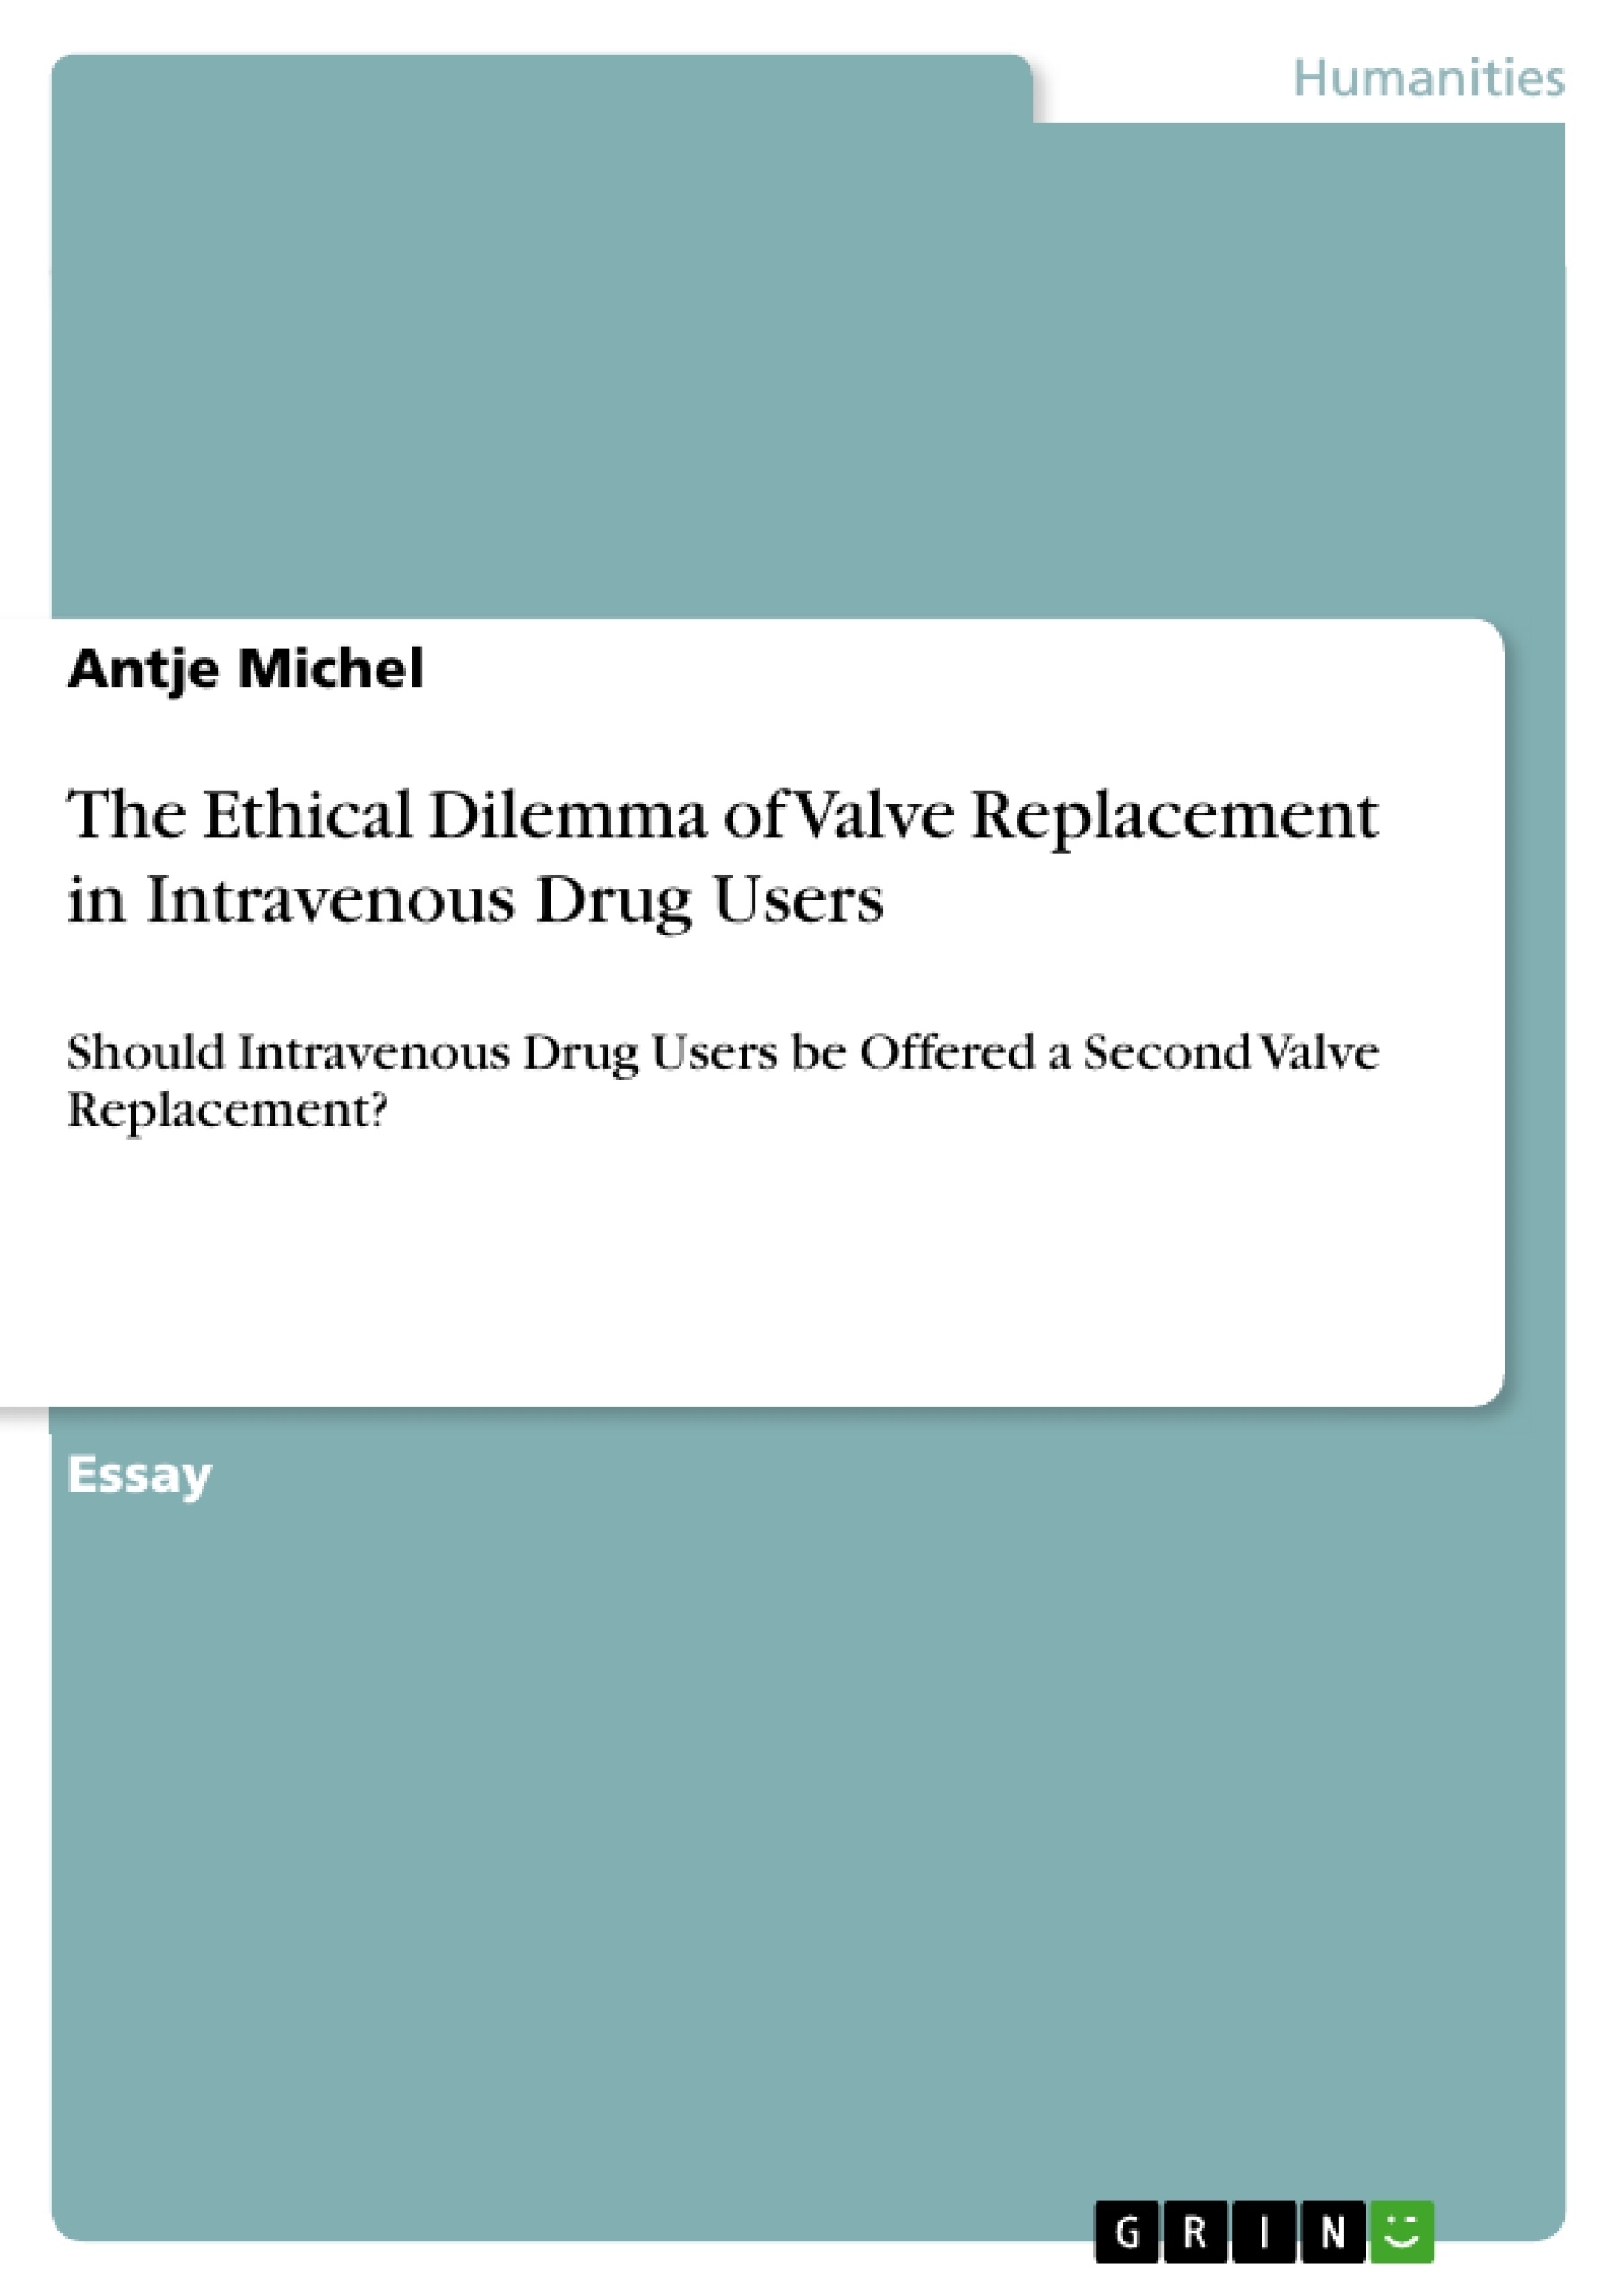 Título: The Ethical Dilemma of Valve Replacement in Intravenous Drug Users